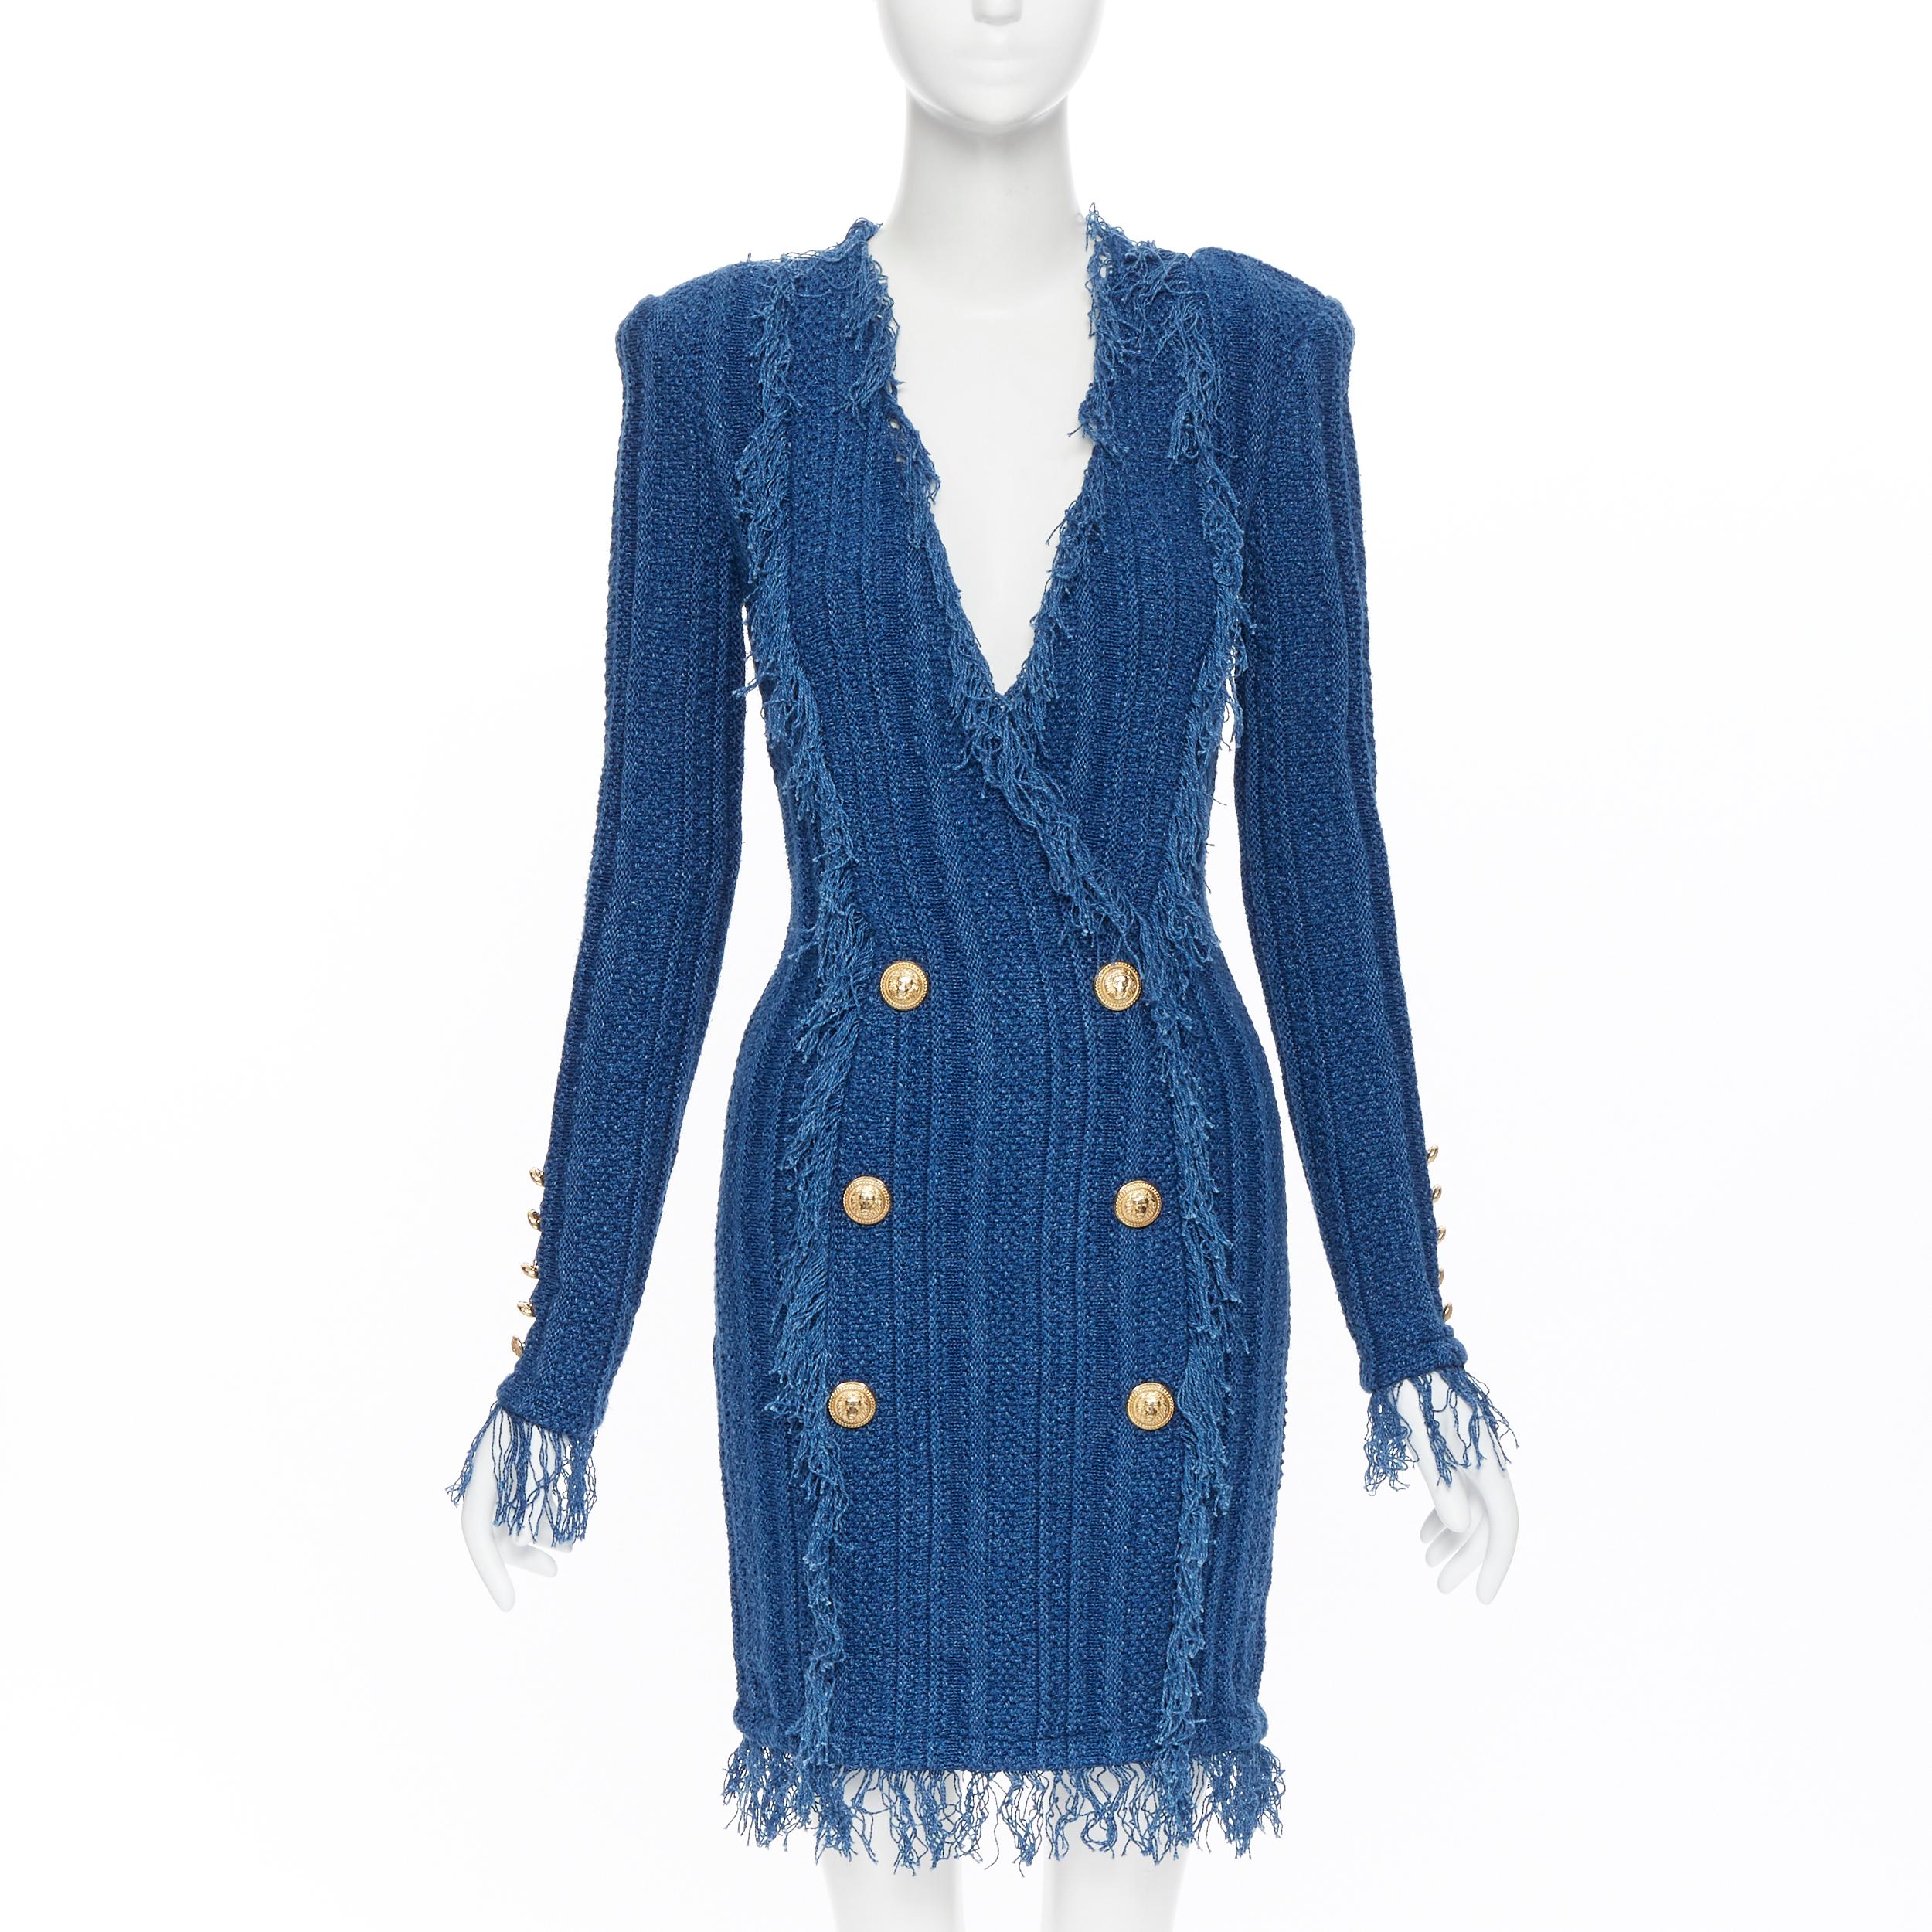 Blue new BALMAIN blue cotton fringe trimmed double breasted knit bodycon dress FR40 L